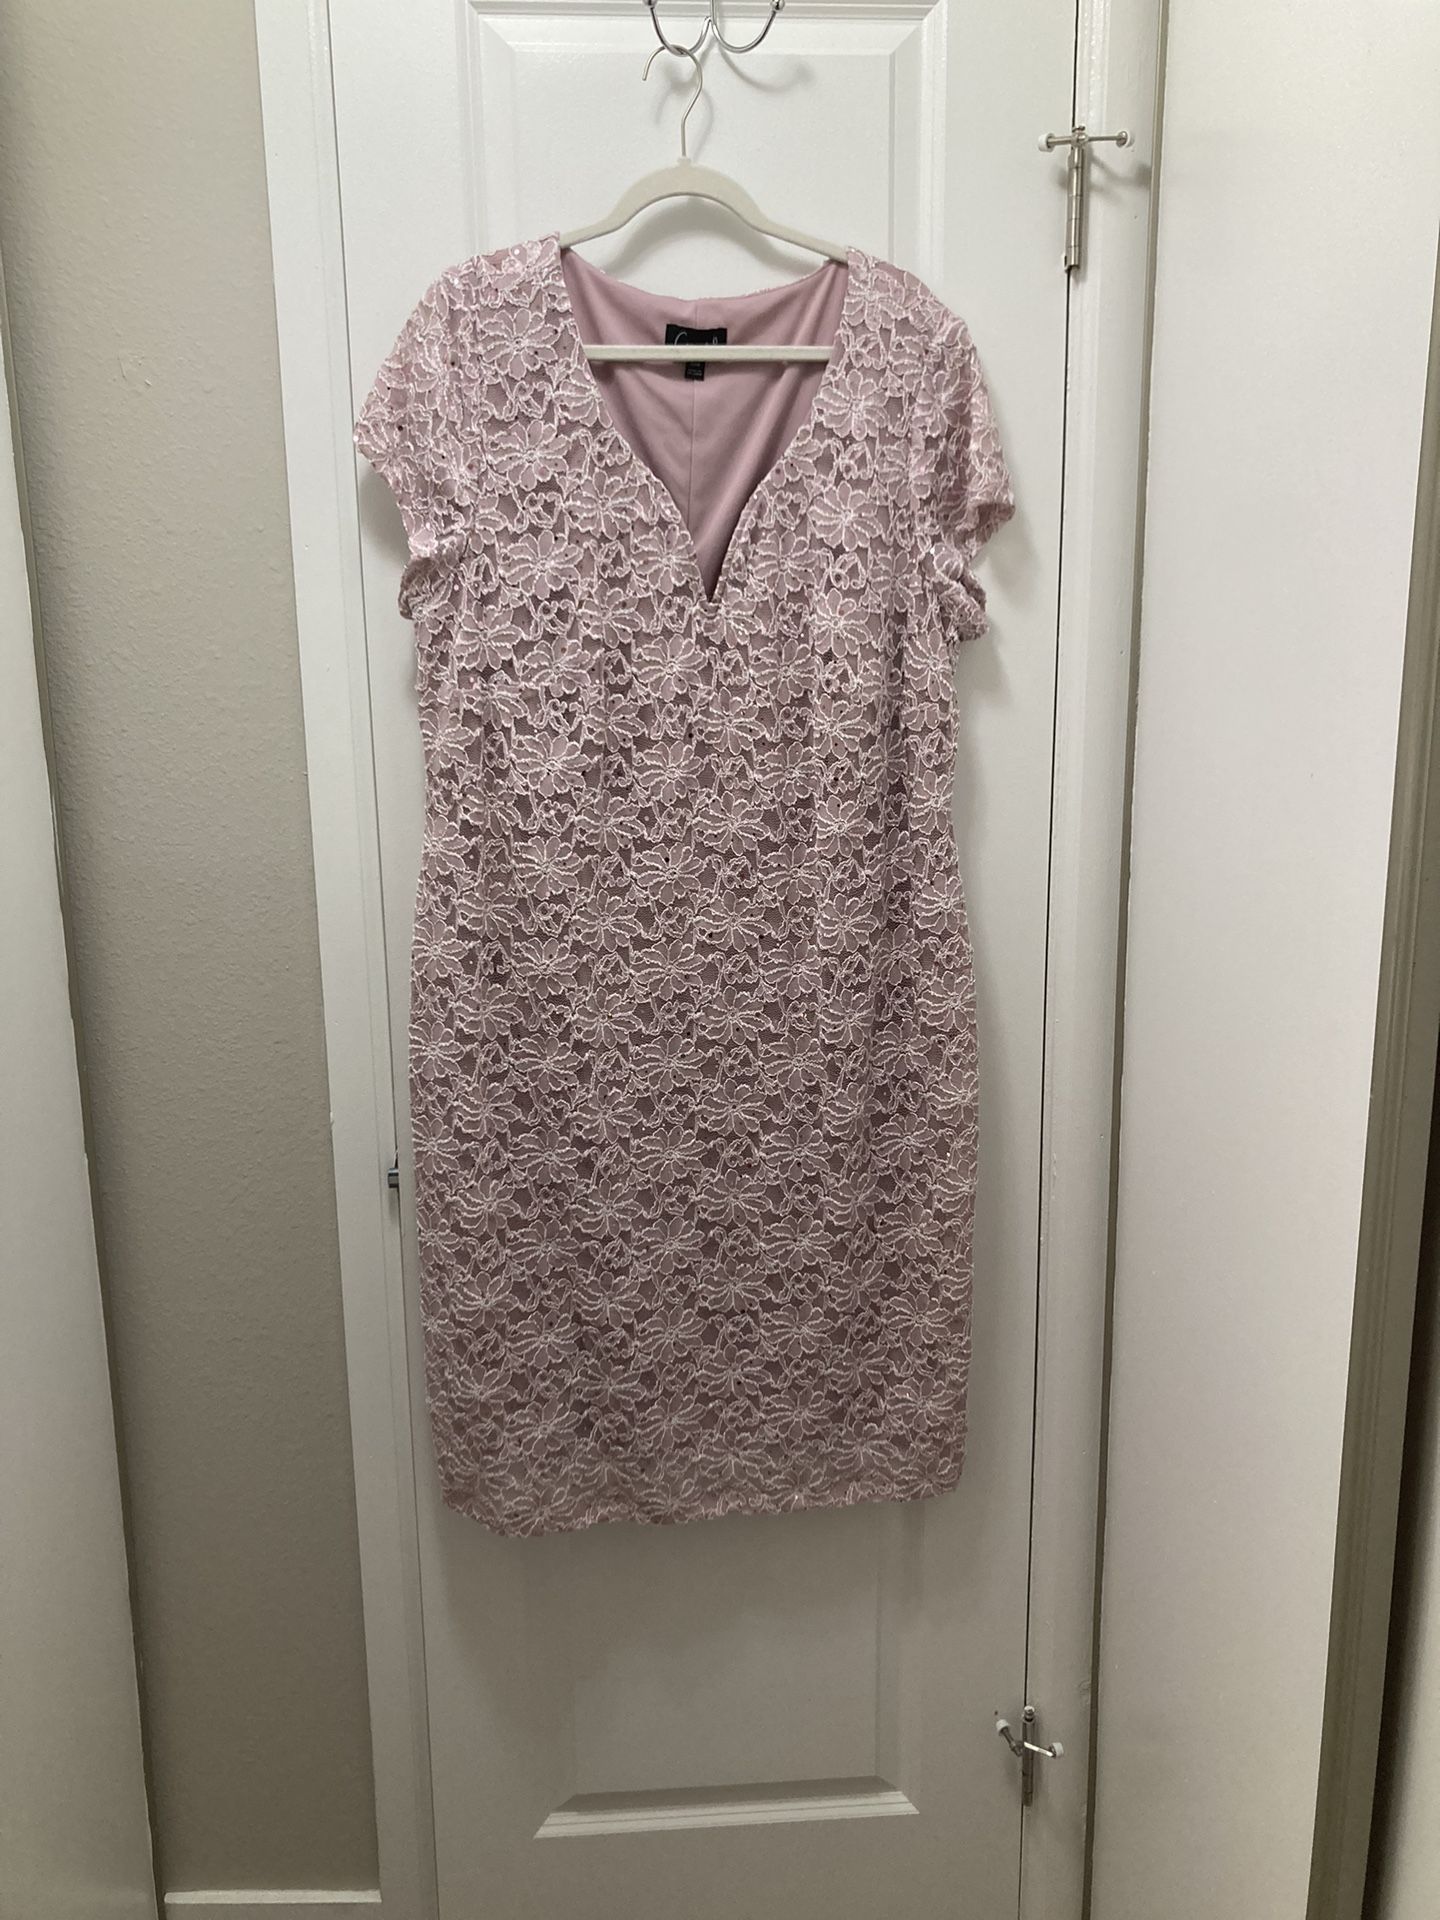 Macy’s Only Worn Once Pink Dress